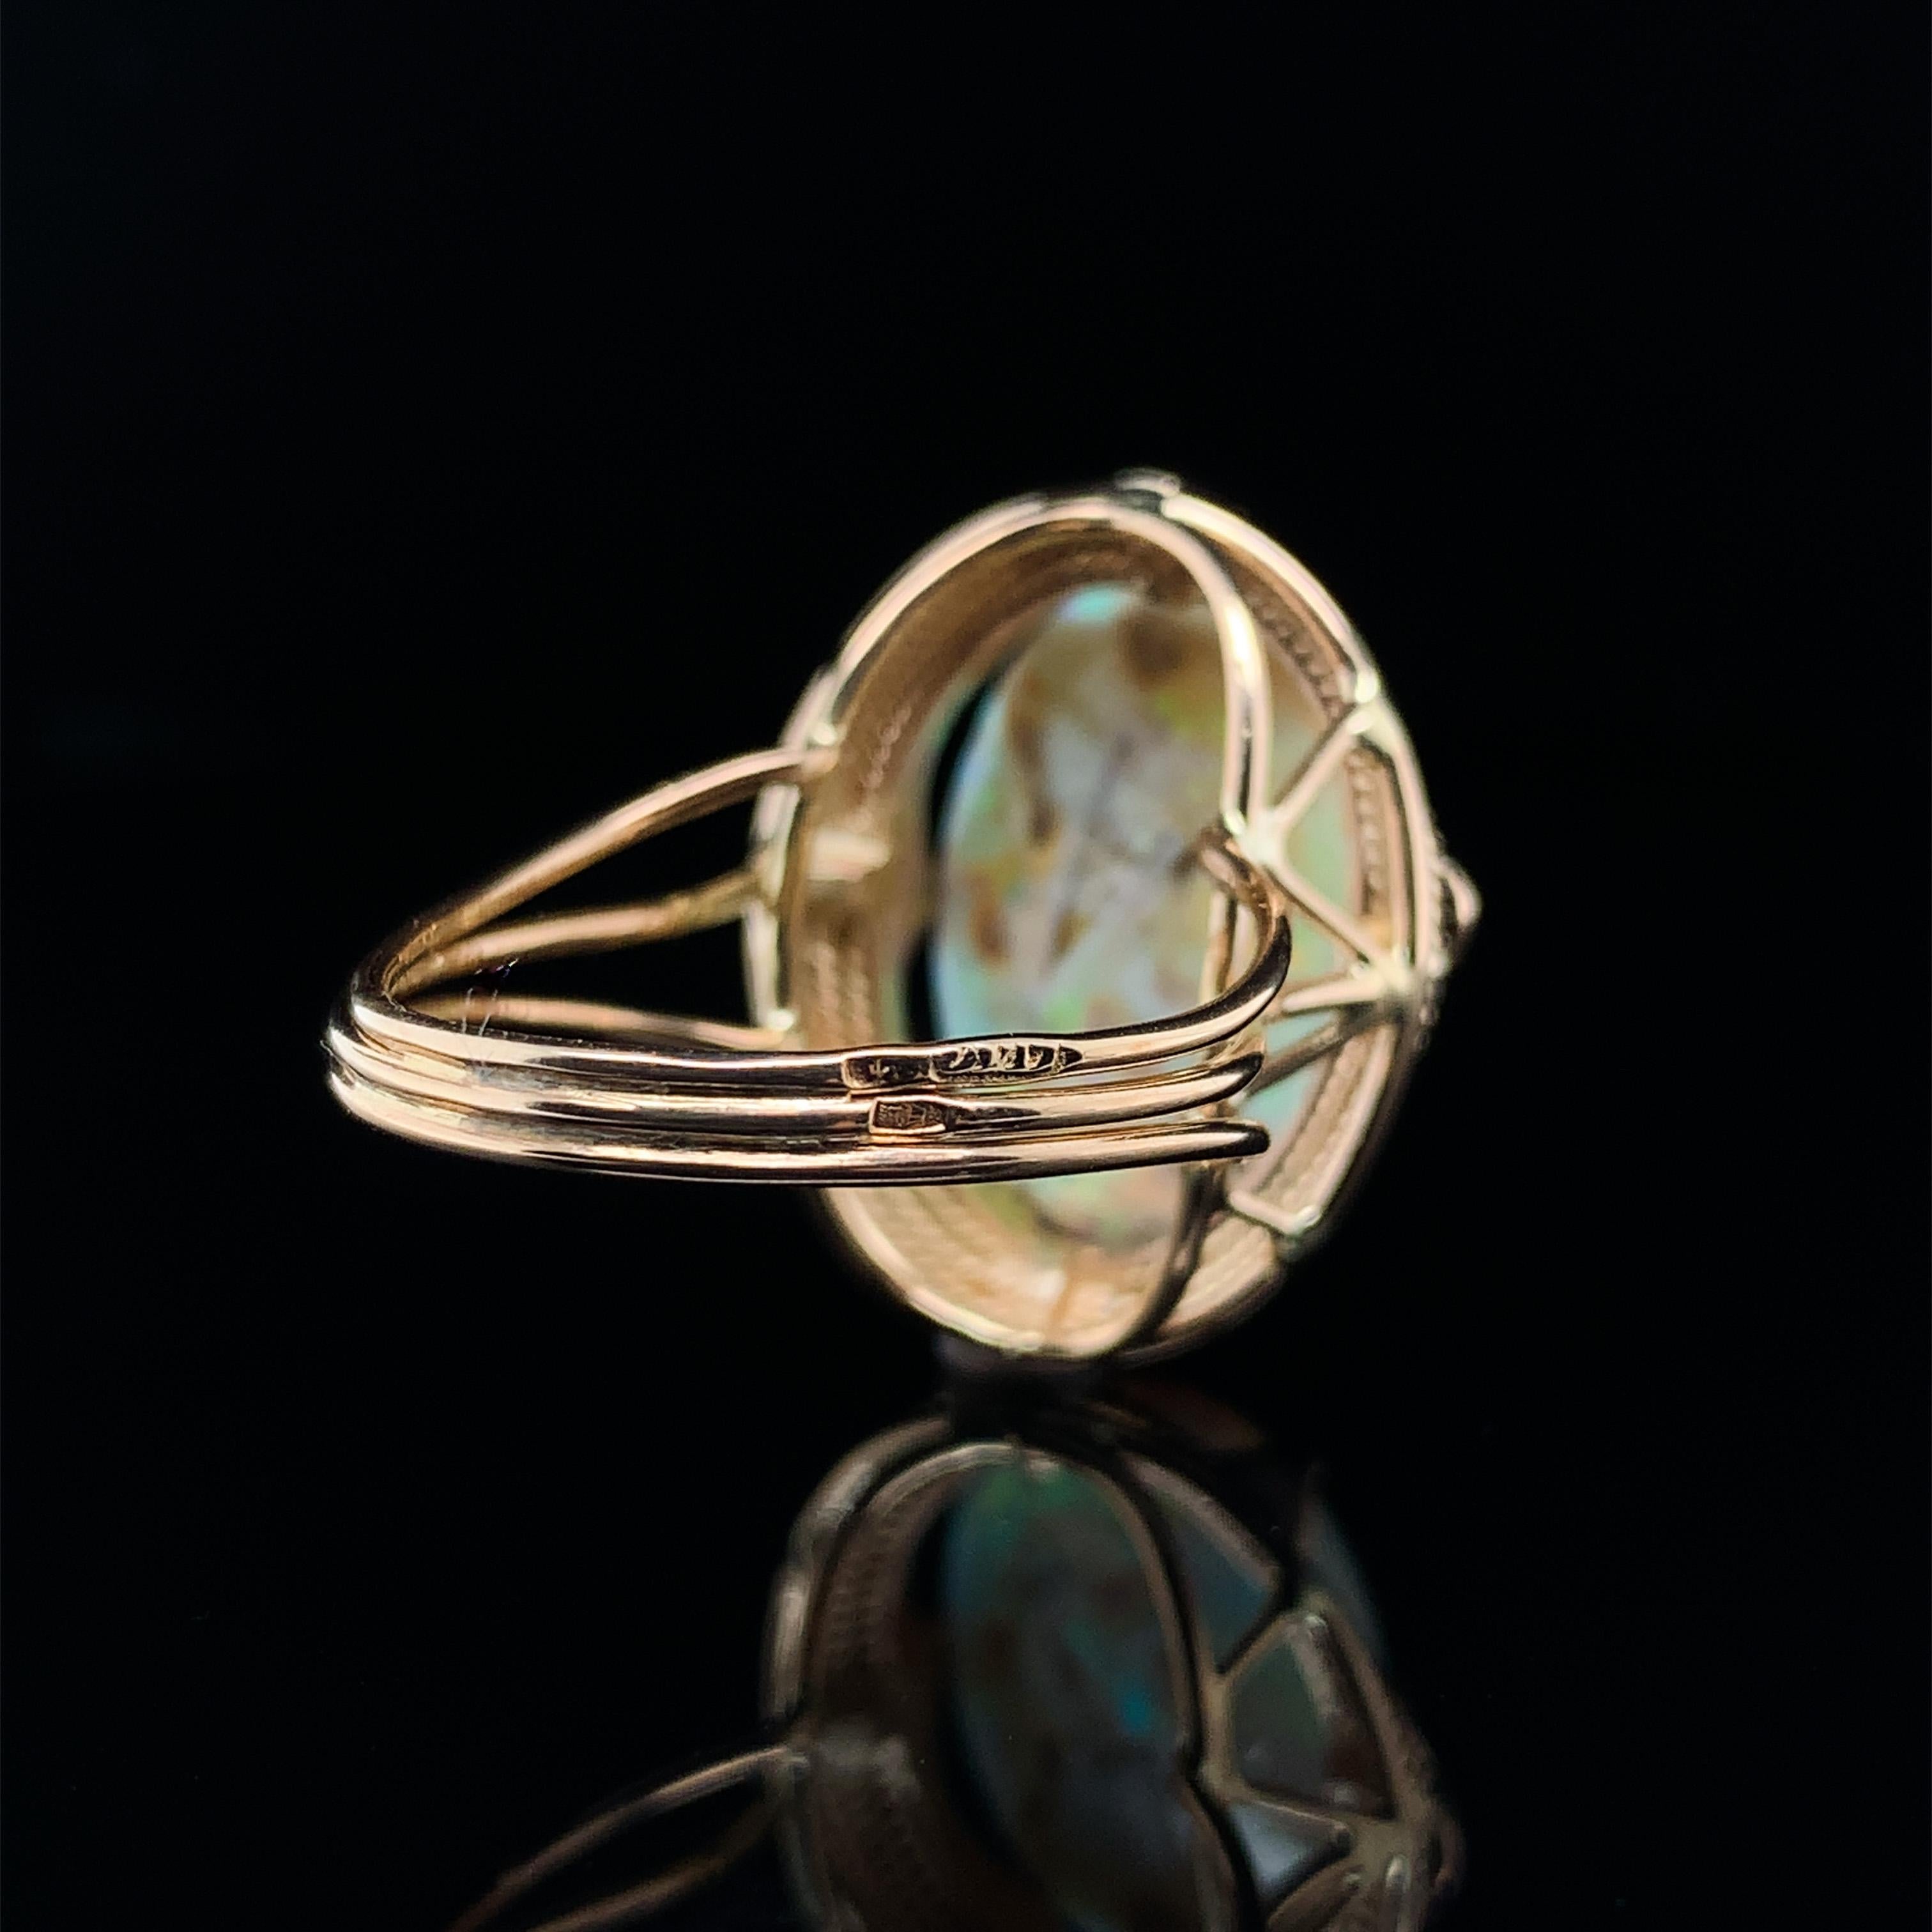 14K Rose Gold Hand Wrought Ring with a large 6.05 carat Australian Opal For Sale 4